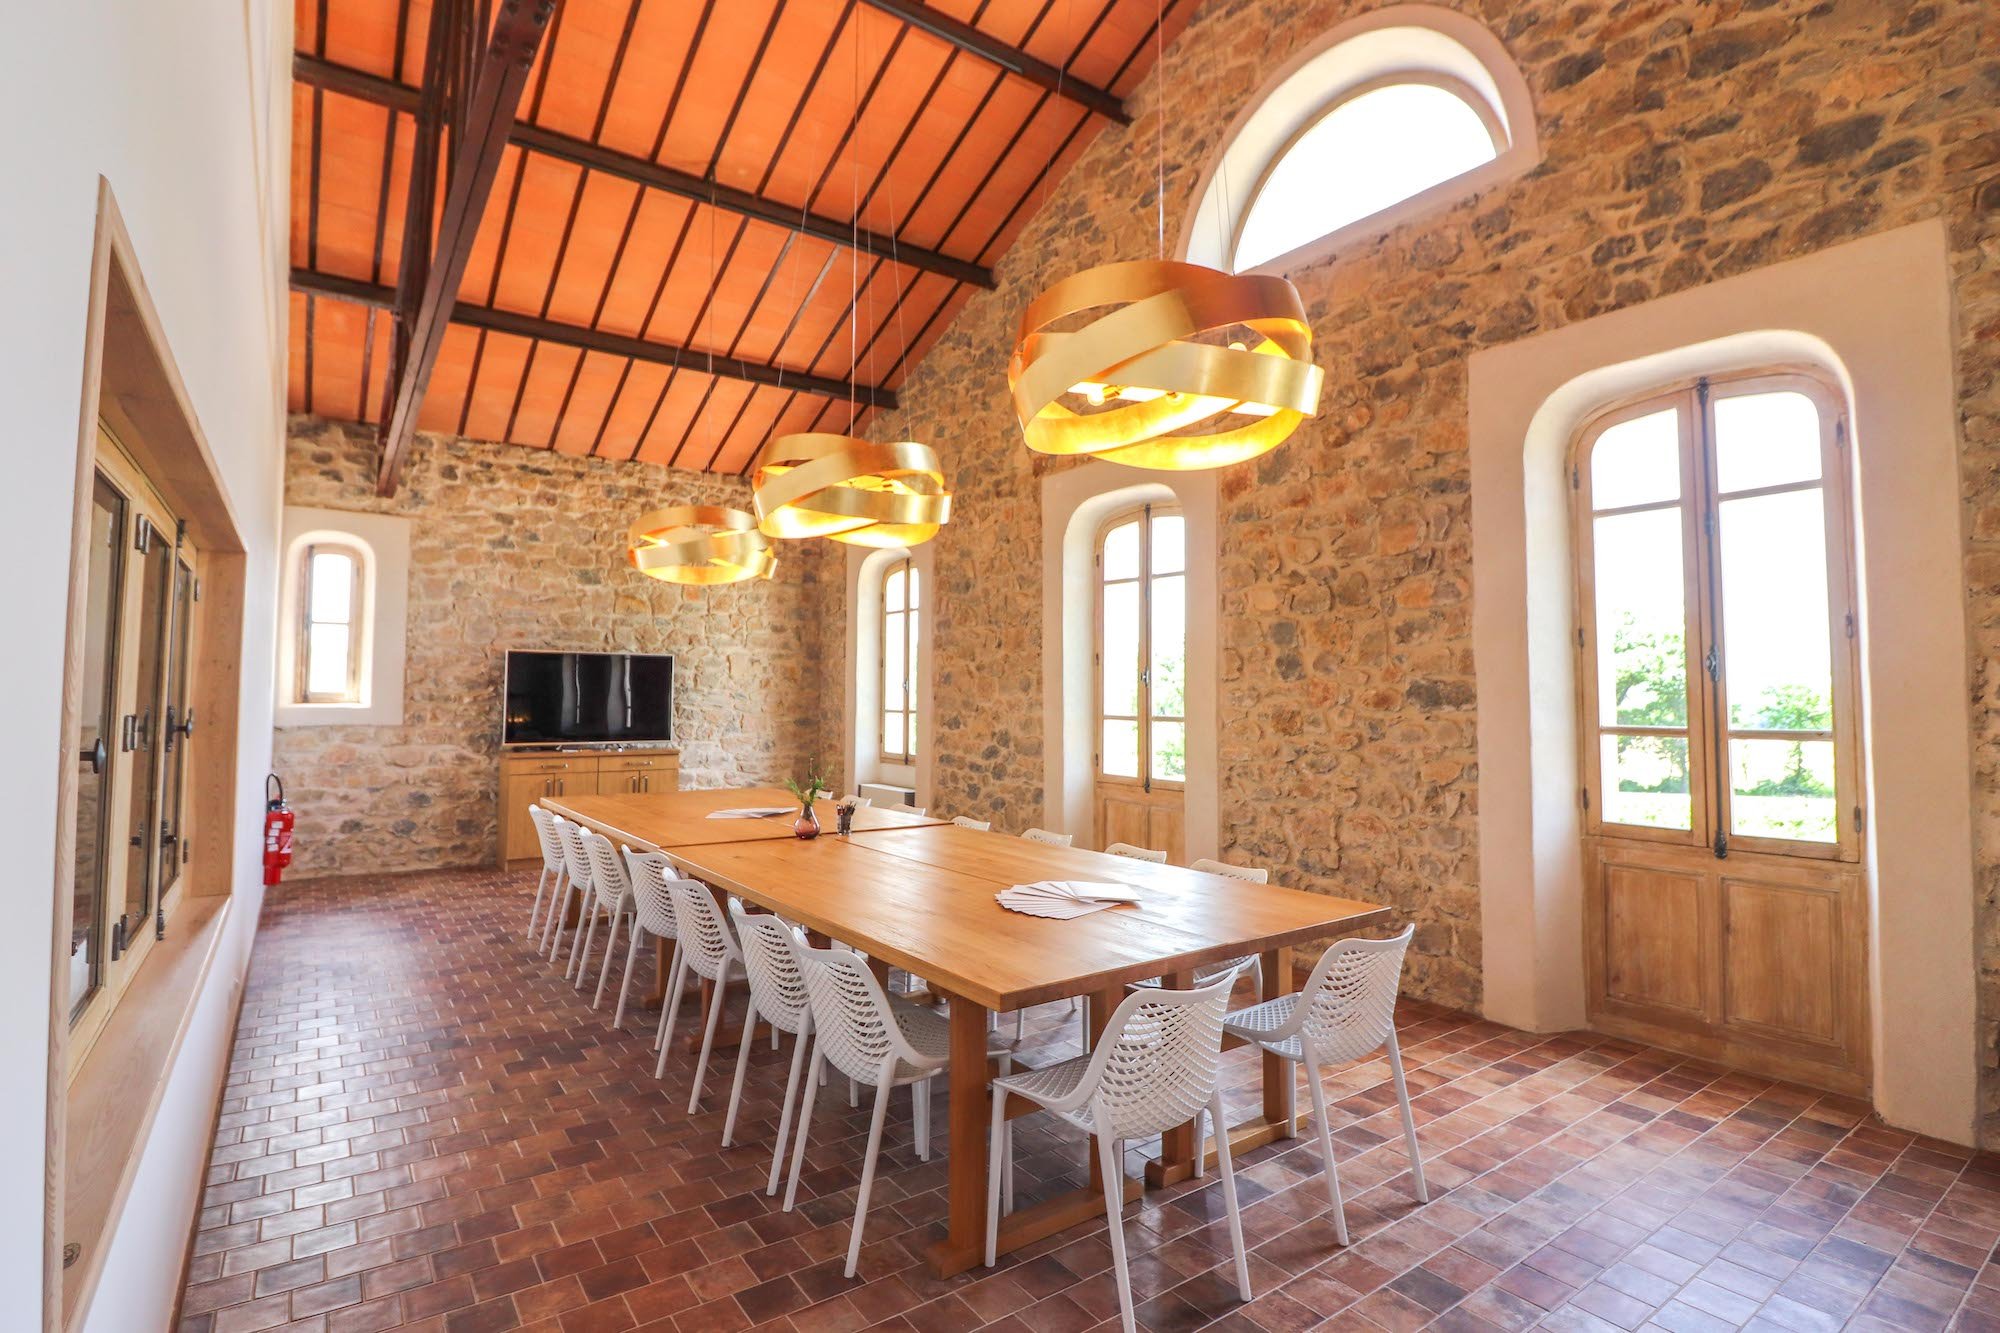 Prestigious Provencal chateau in the heart of the vineyards, to organize your corporate seminar. 